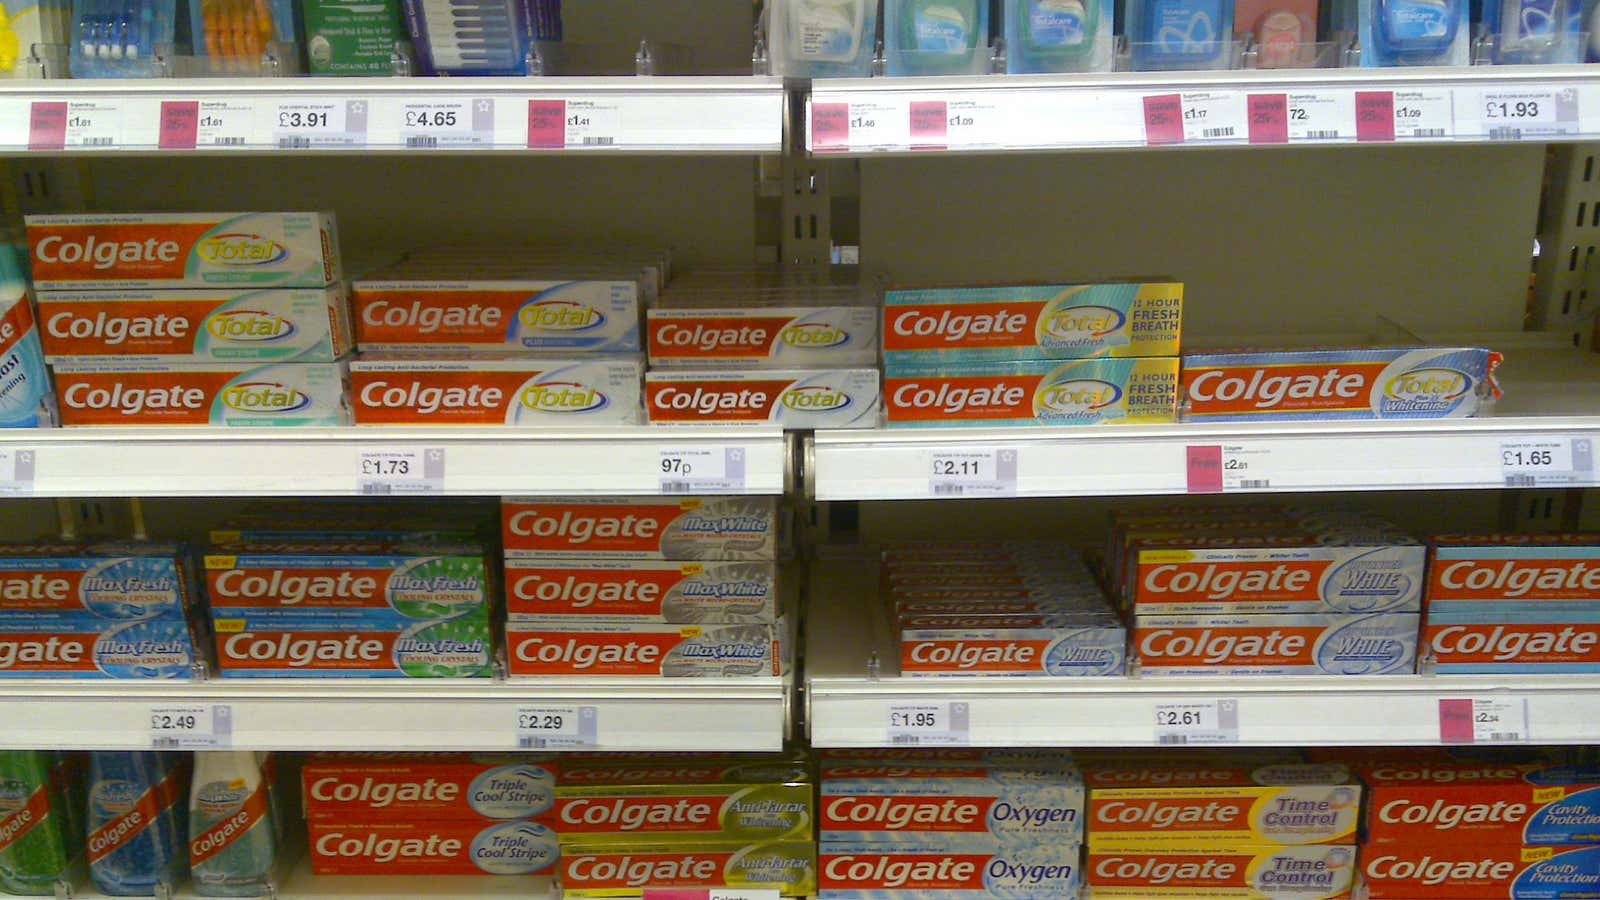 The antimicrobial Triclosan is in thousands of consumer products, including Colgate Total toothpaste